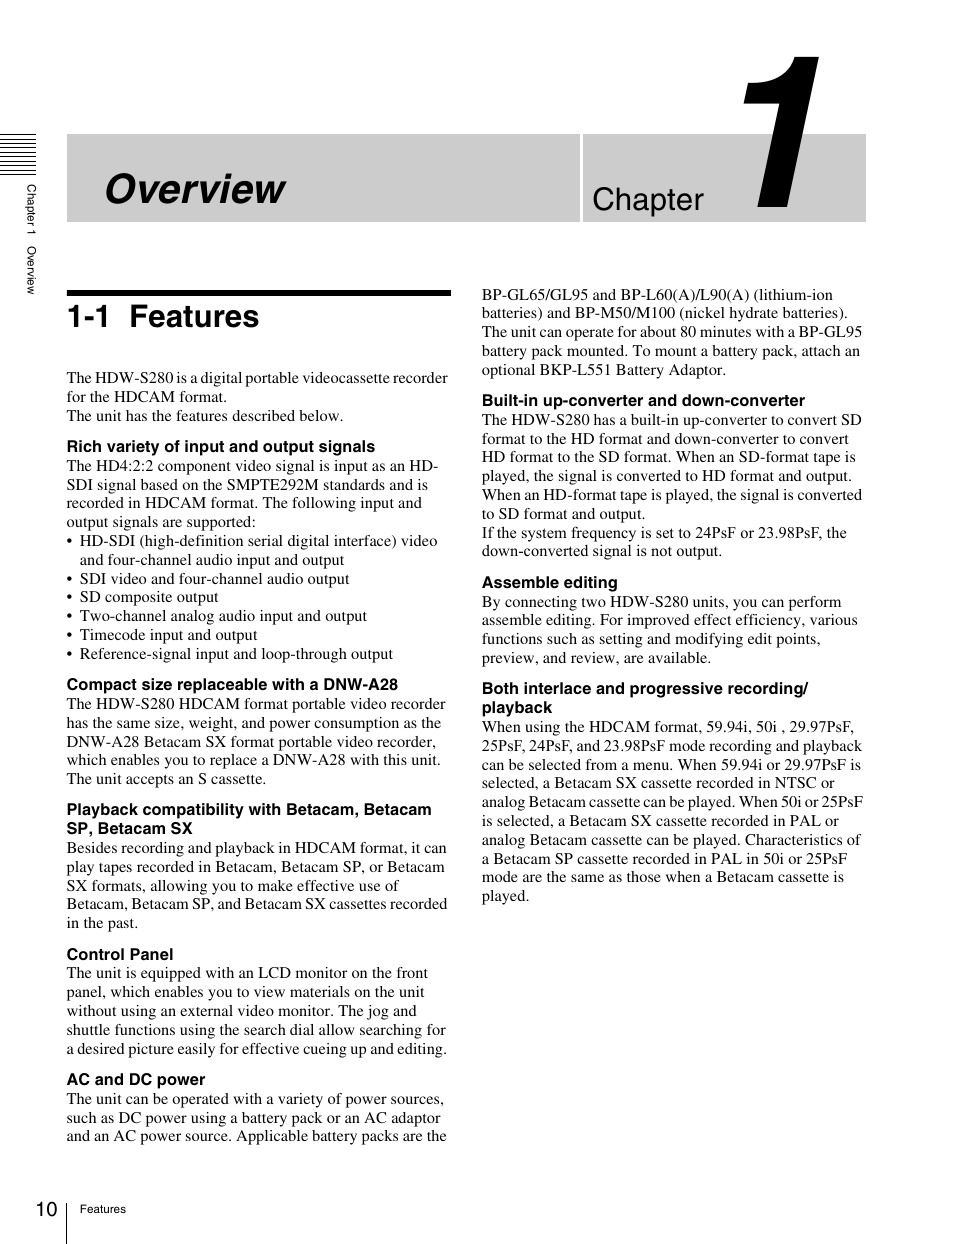 Chapter 1 overview, 1 features, Features | Overview, Chapter | Sony HDW-S280 User Manual | Page 10 / 94